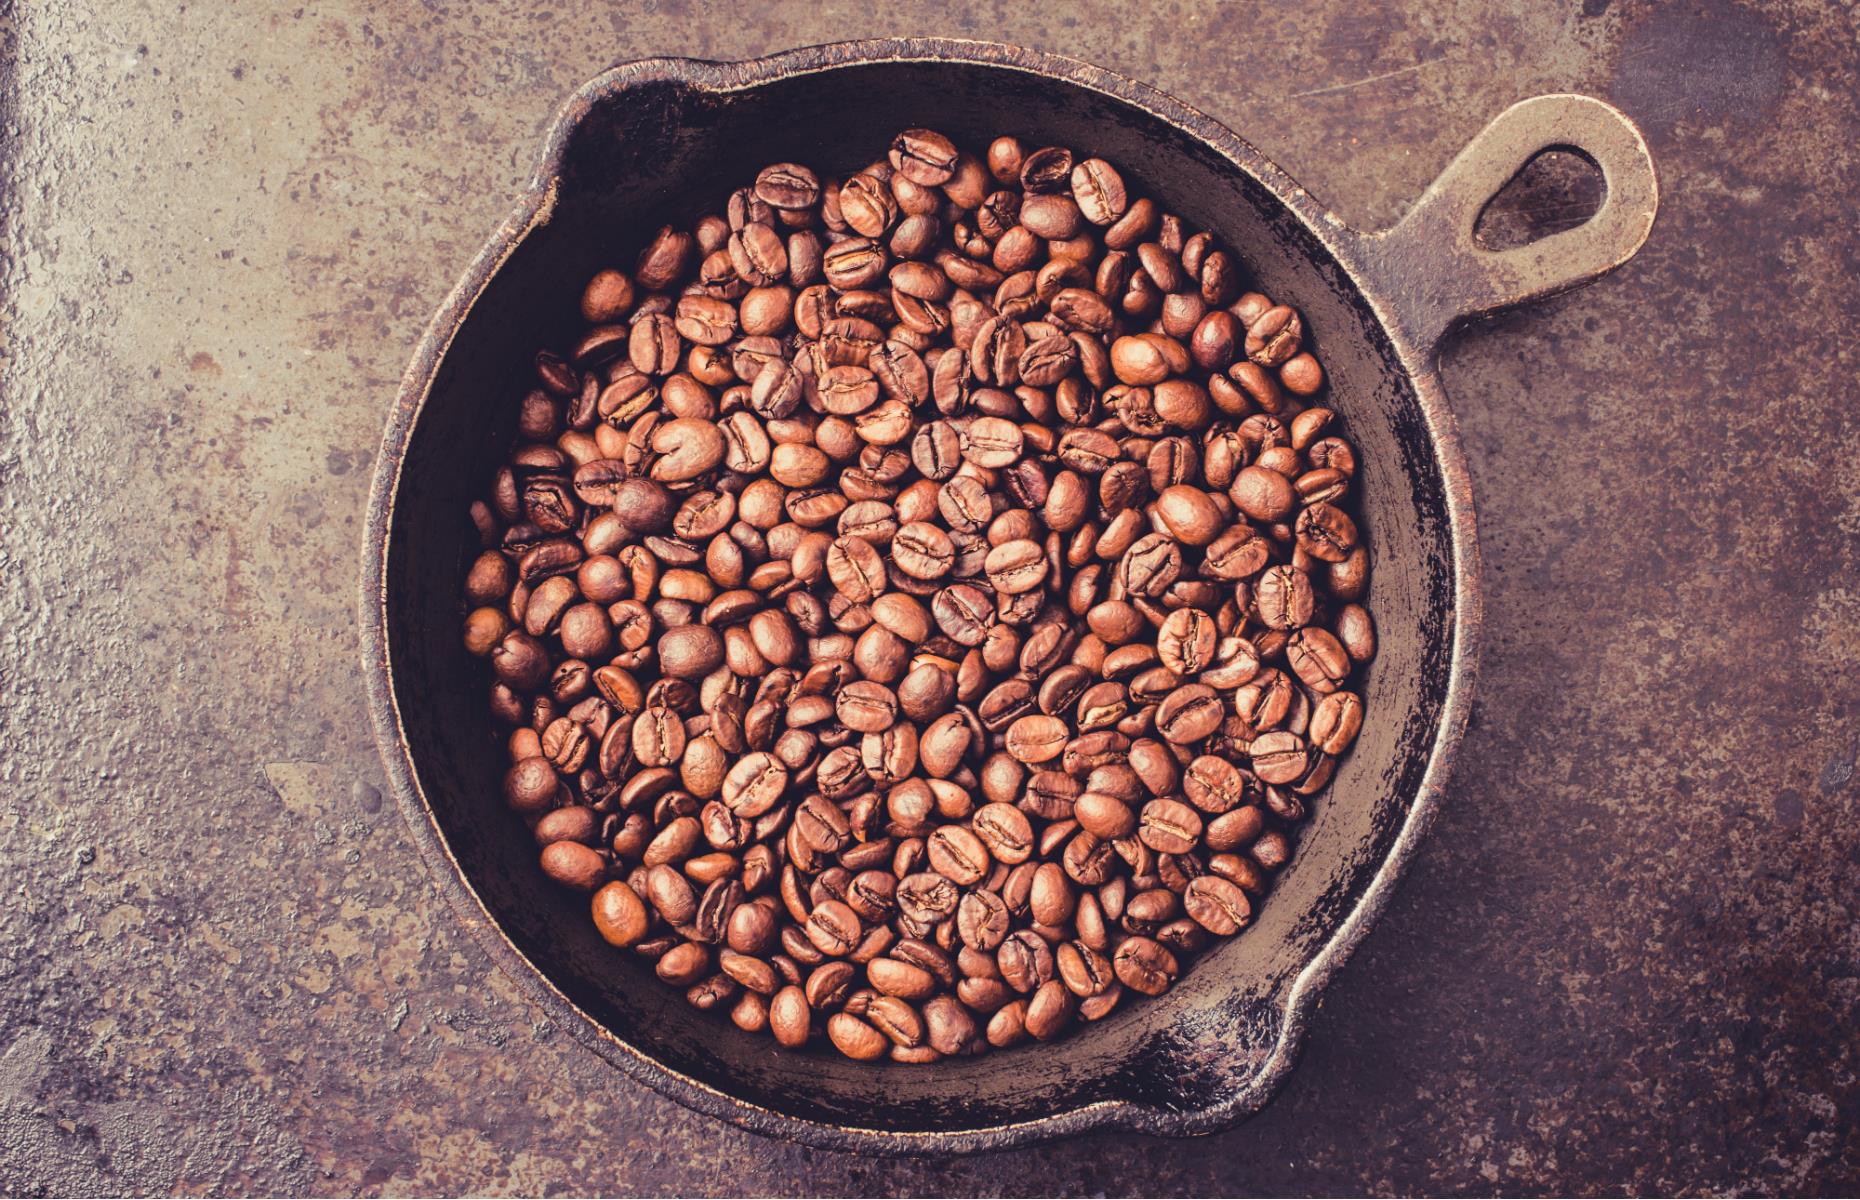 It’s easy to roast your own coffee